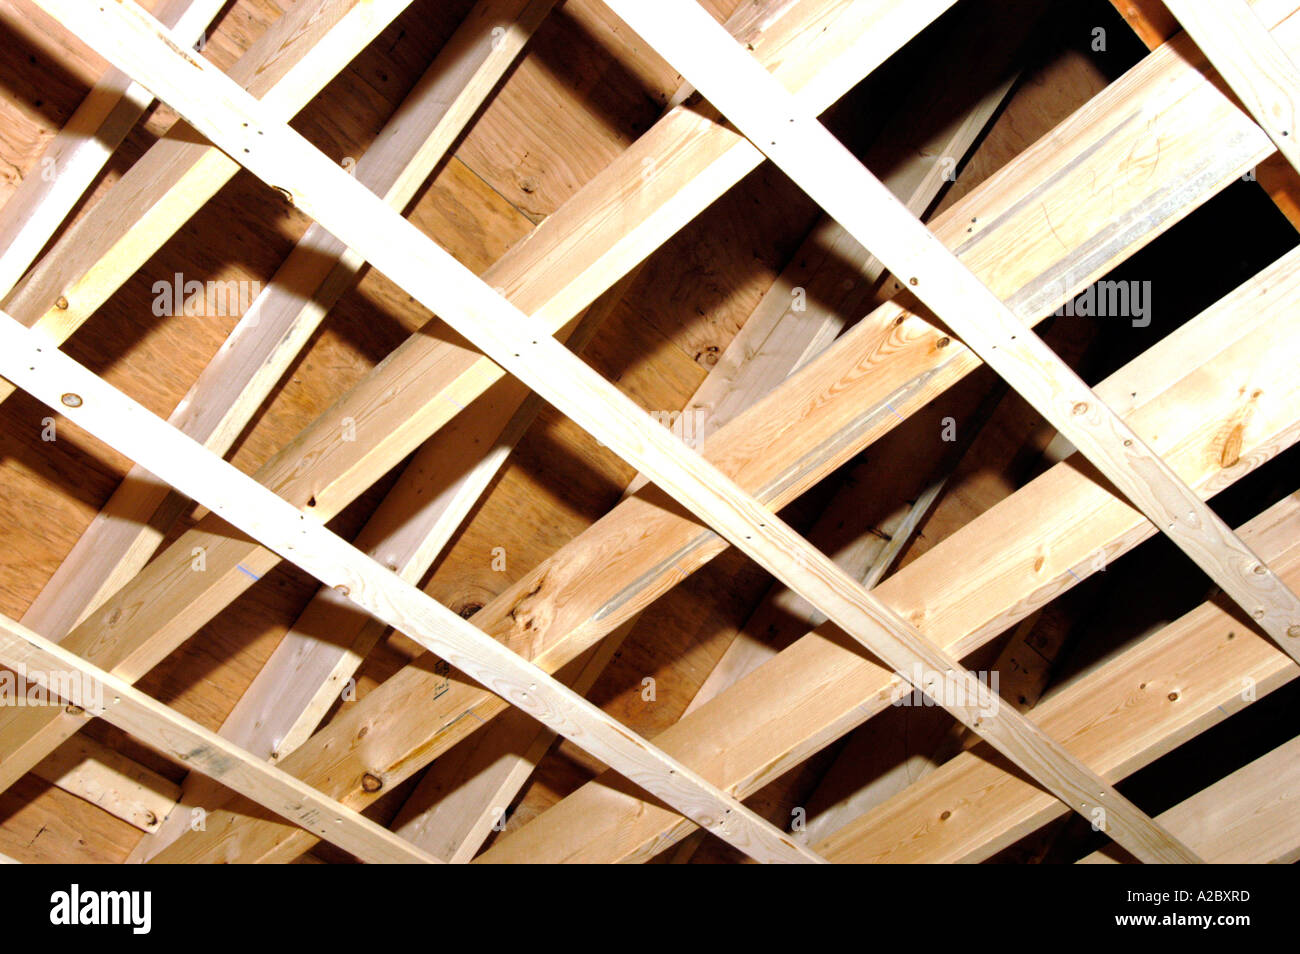 Furring Strips And Roof Joists In A Remodeling Project Stock Photo